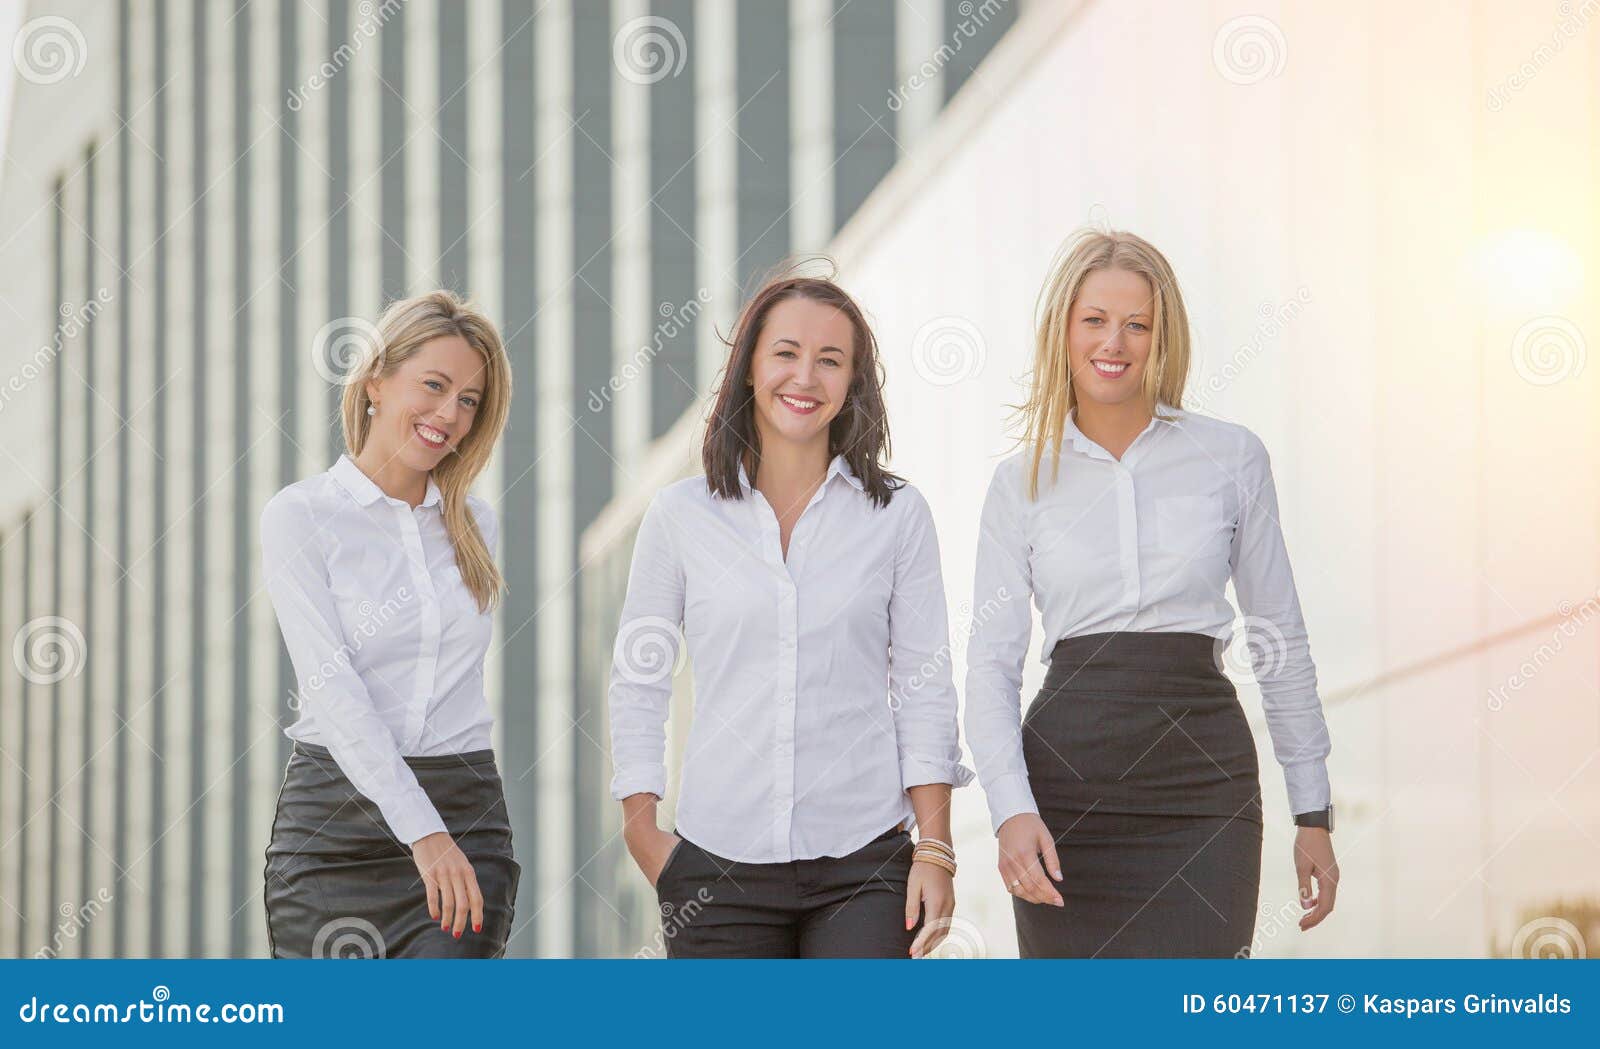 Business women walking stock image. Image of official - 60471137